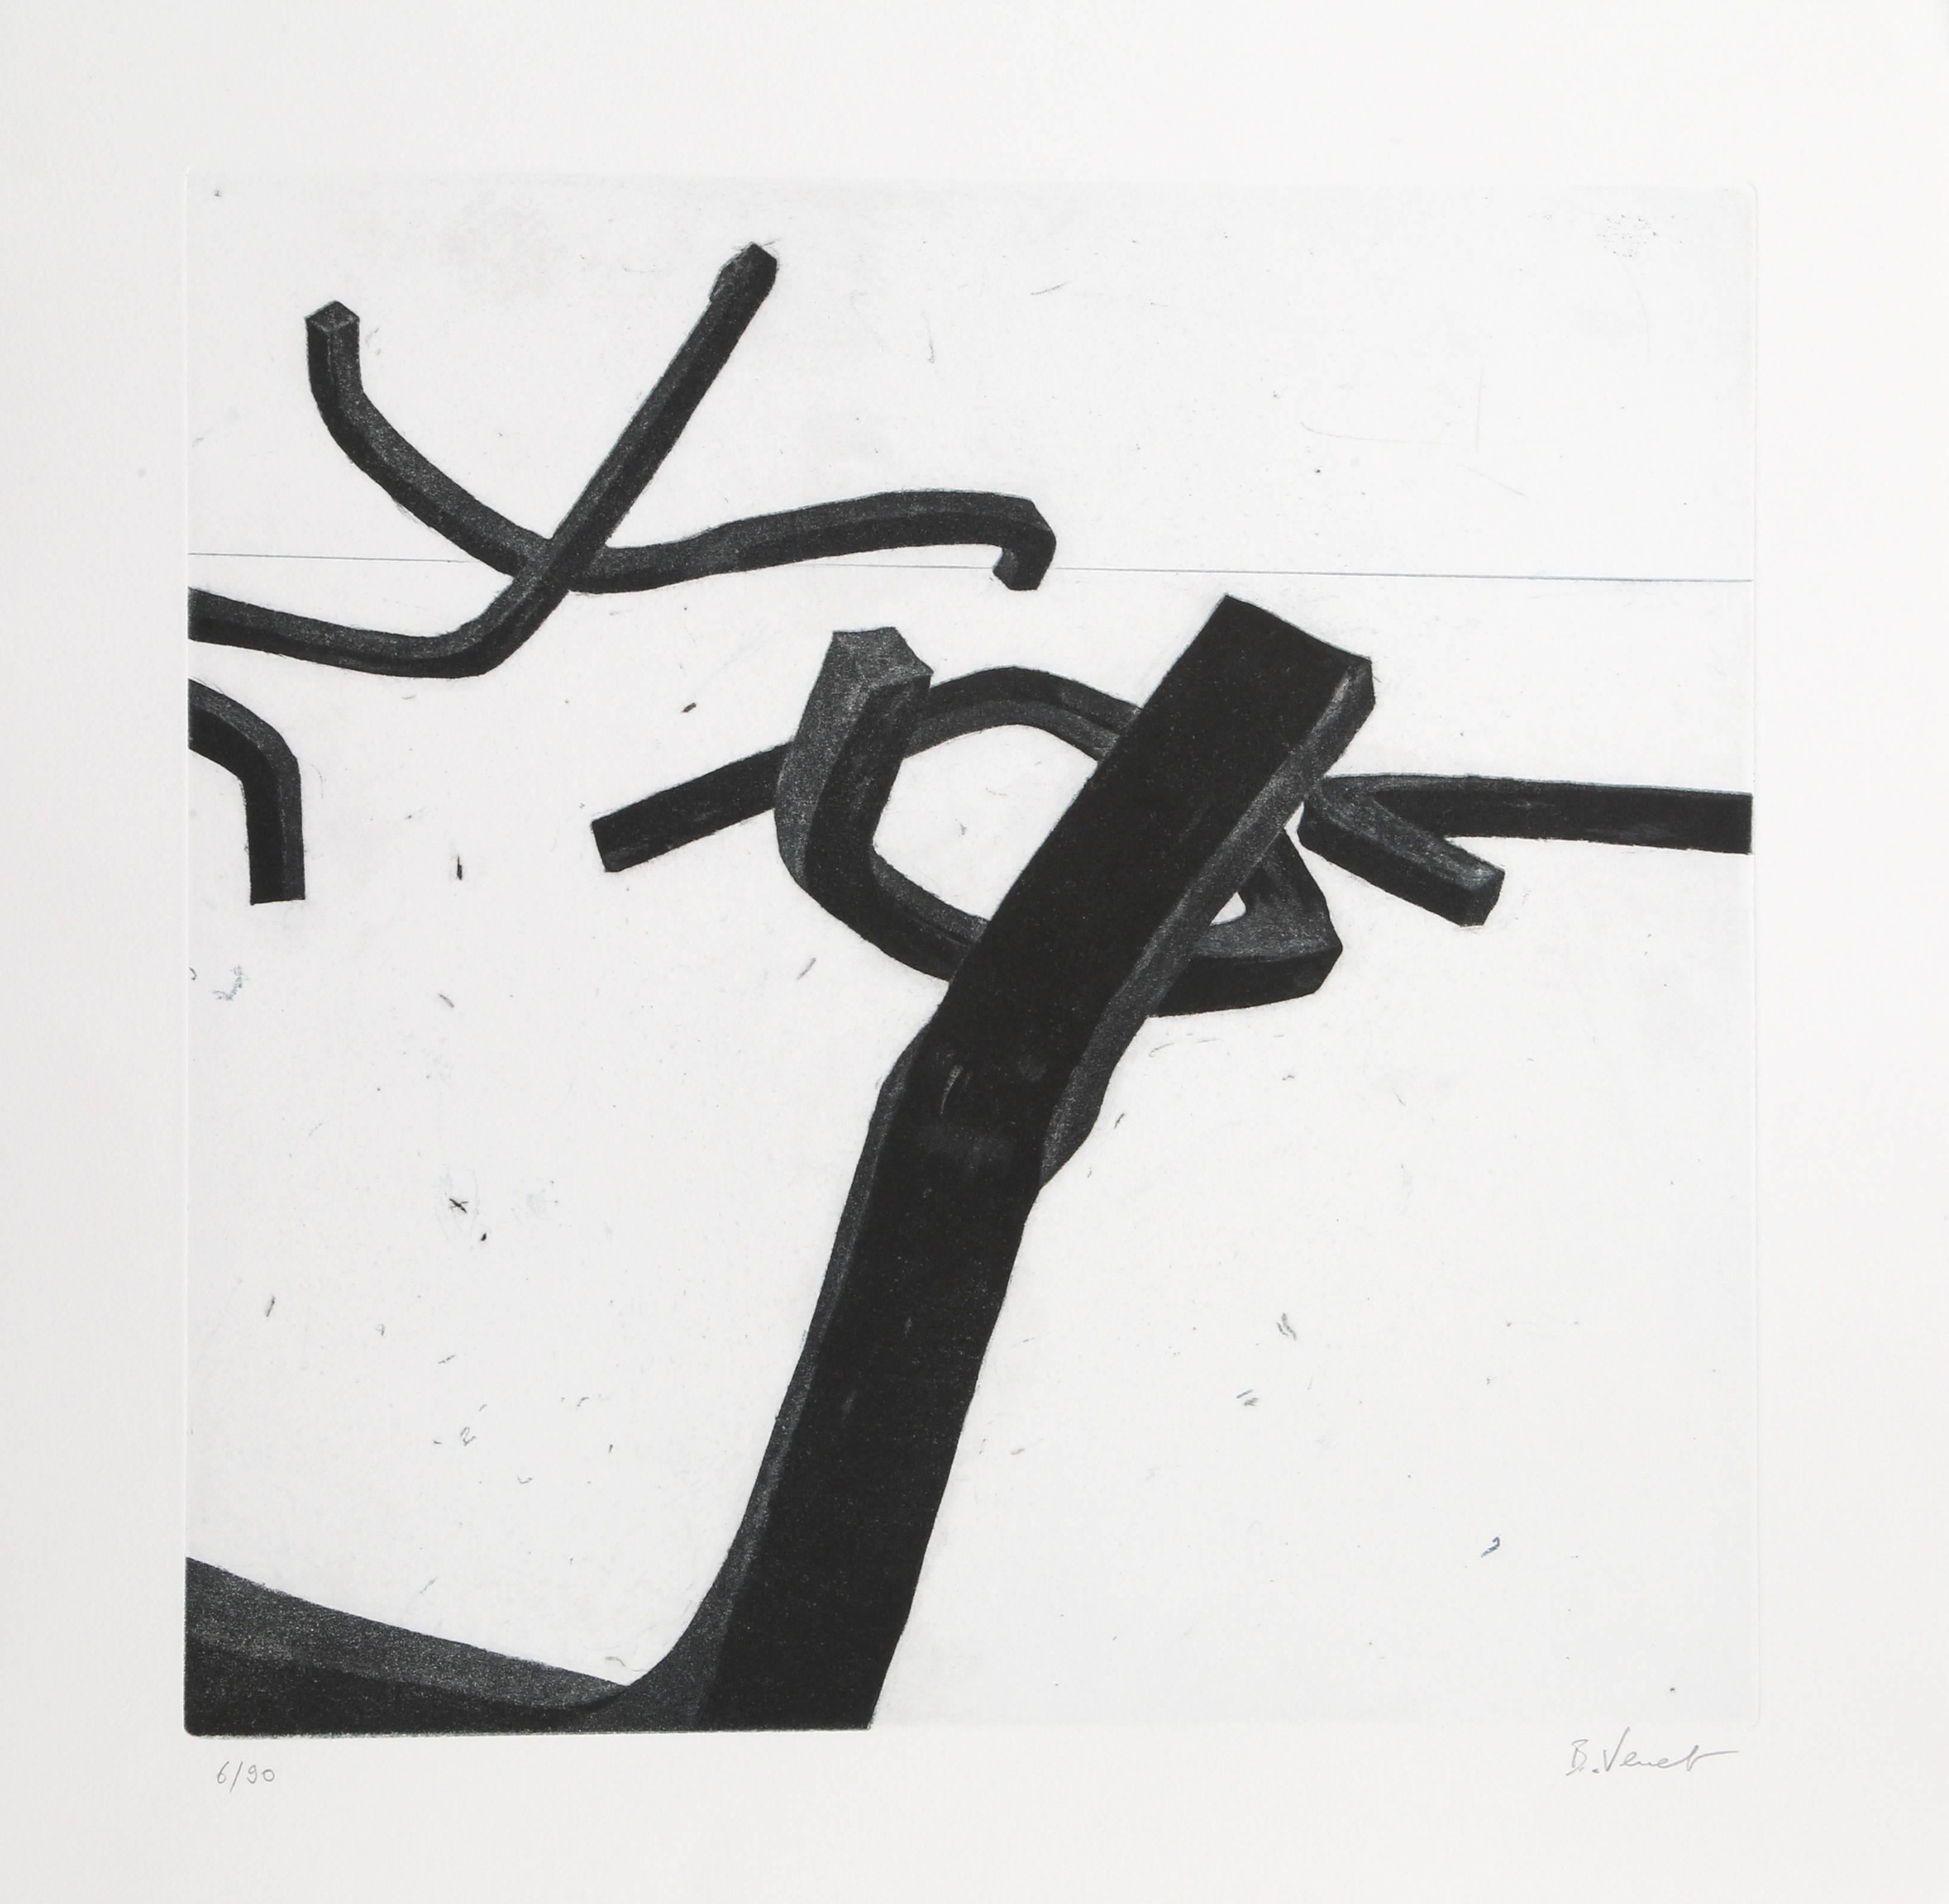 This etching comes from the portfolio "Combinaison Aleatoire de Lignes Indeterminees" by French sculptor and artist Bernar Venet. Throughout his career, Venet moved from action painting into a more logical, mathematical style influenced by